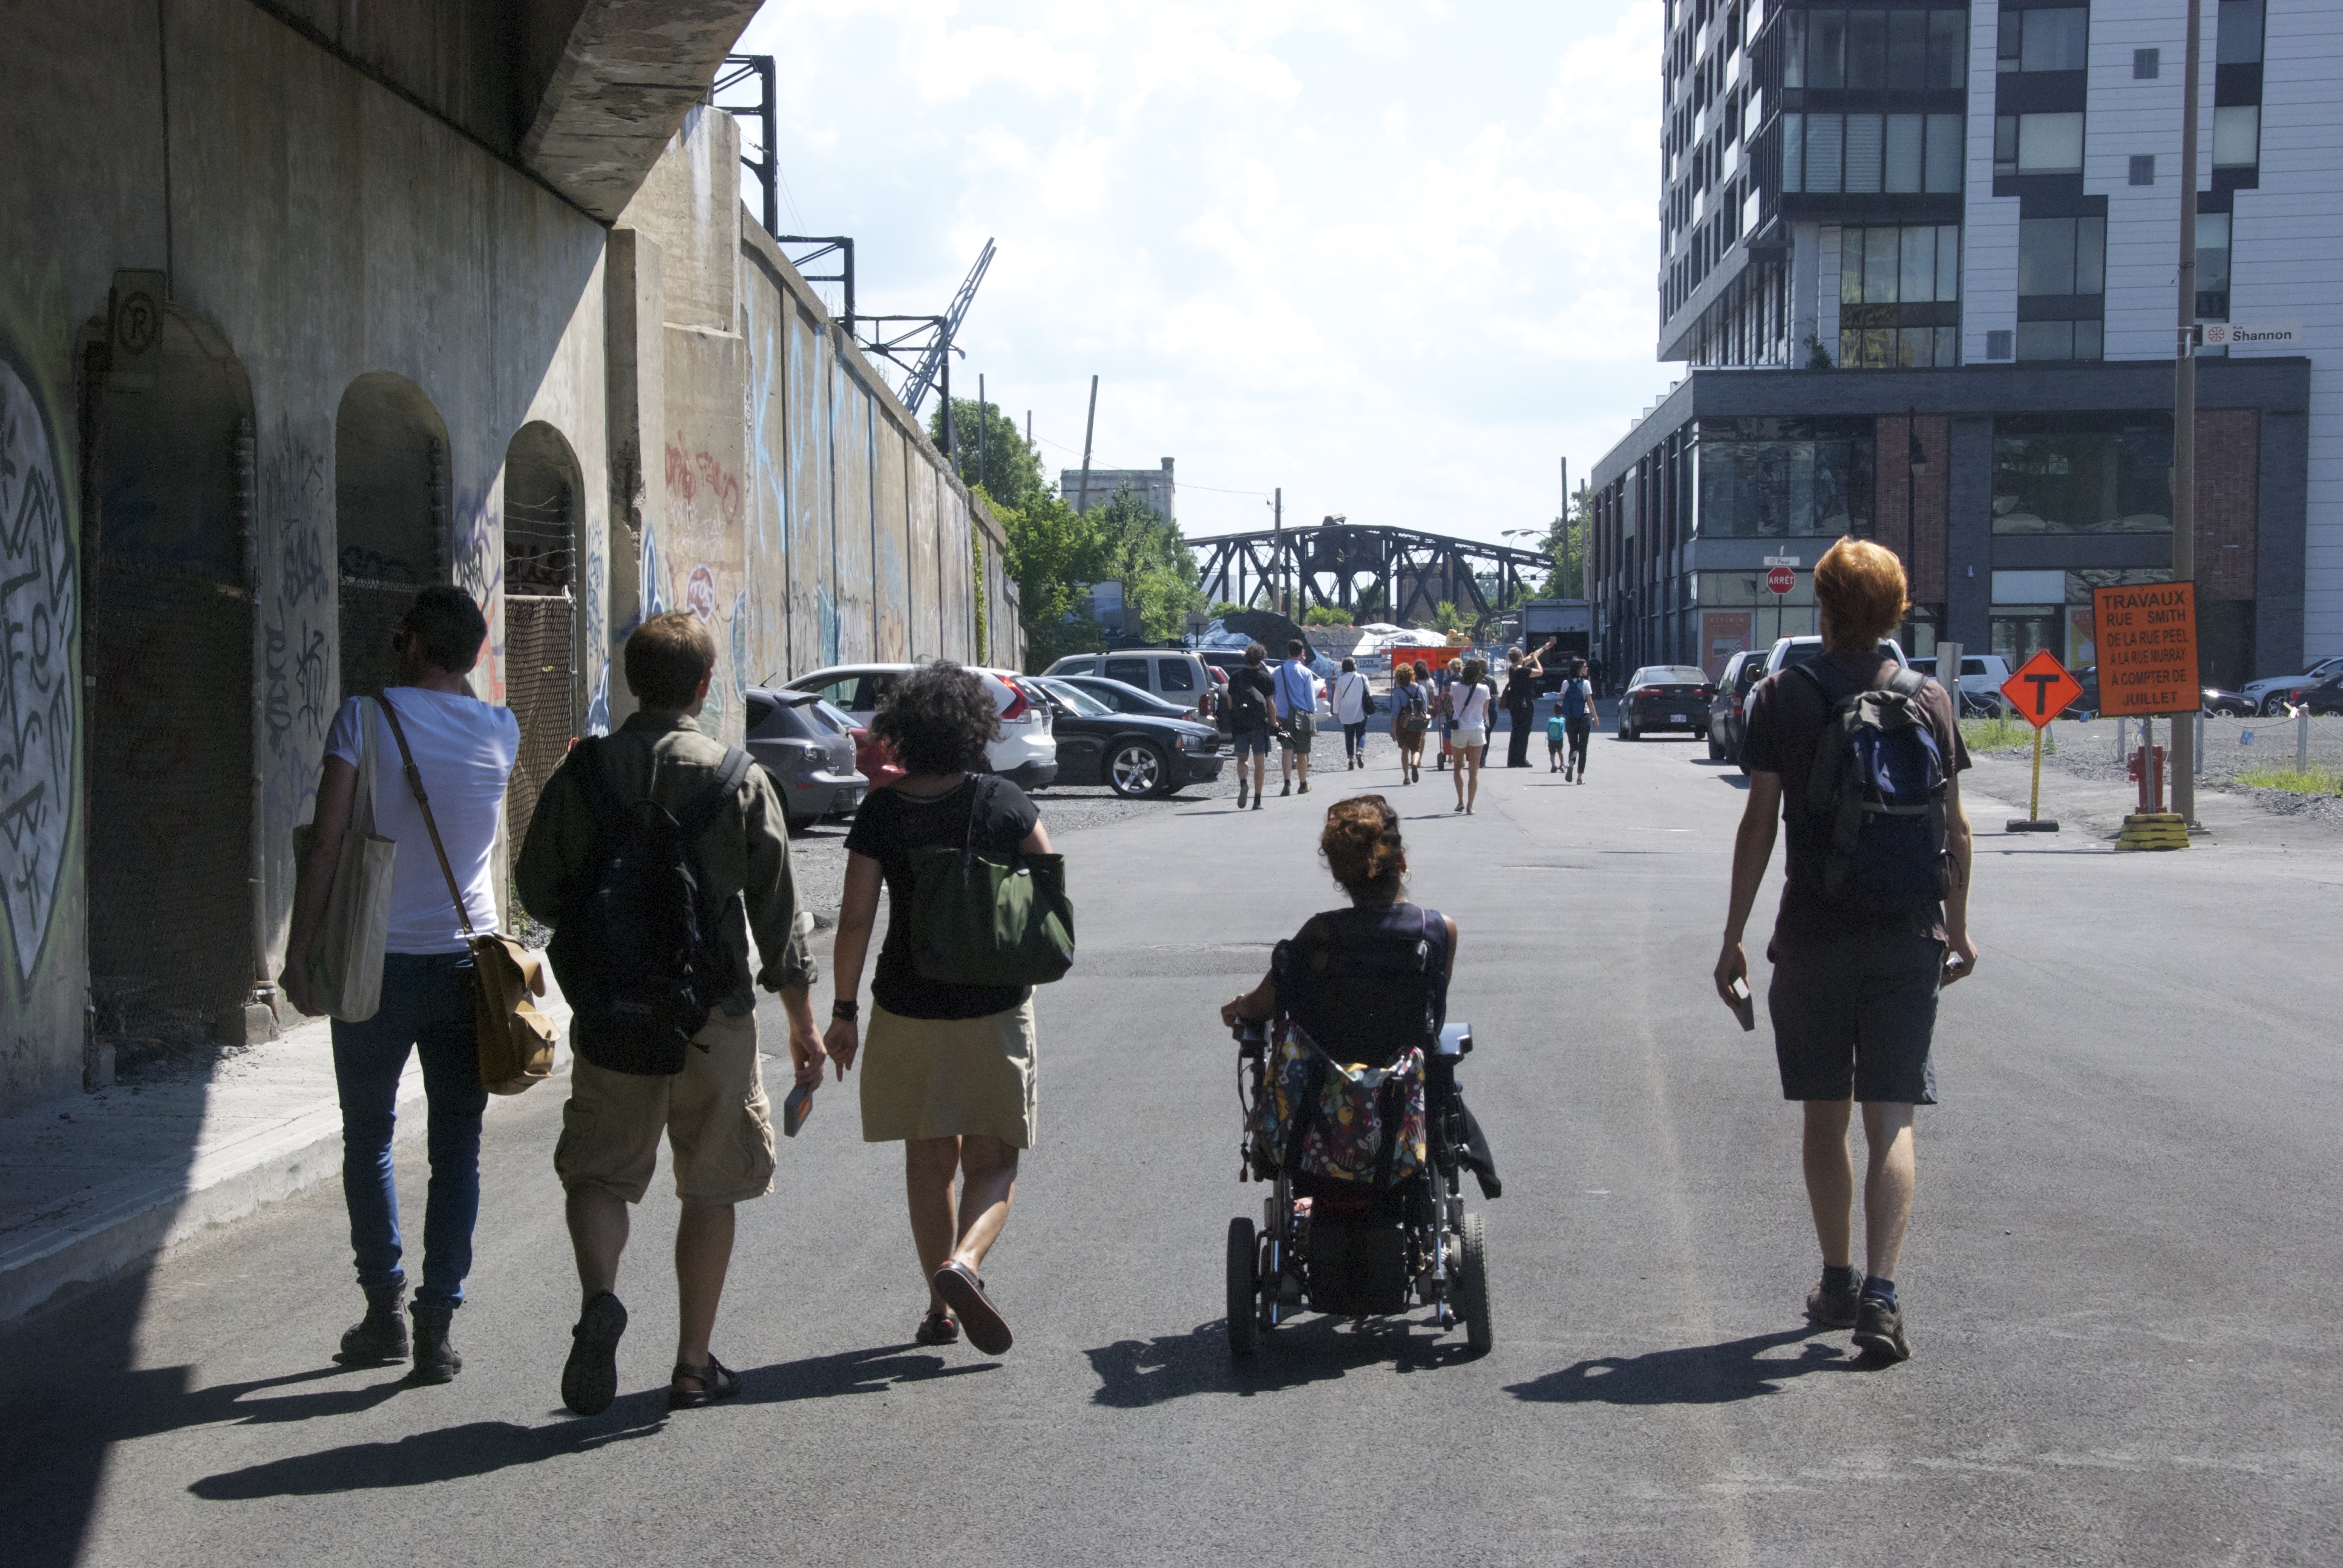 [Image 15 - Participants traversing Griffintown during the Spatial justice urban lab, 26 July 2014. Photo: C.Bédard]